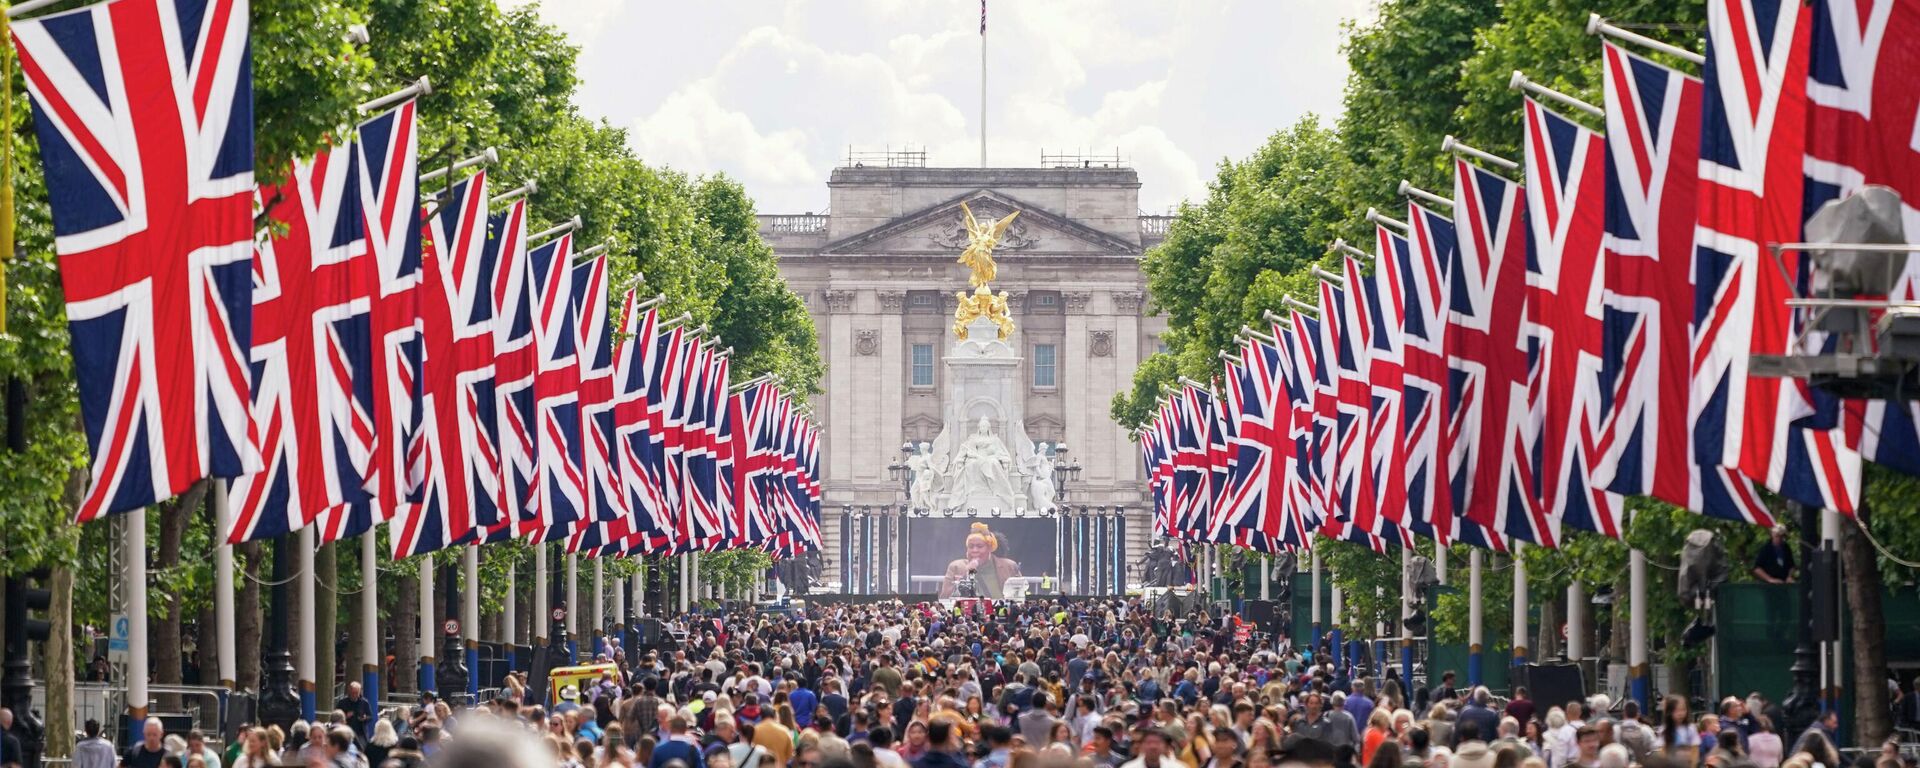 People walk along The Mall in London, Wednesday, June 1, 2022, ahead of the start of the Queen's Jubilee weekend. Britain will celebrate Queen Elizabeth II's 70 years on the throne with four days of festivities beginning with her ceremonial birthday parade on June 2, 2022 - Sputnik International, 1920, 02.06.2022